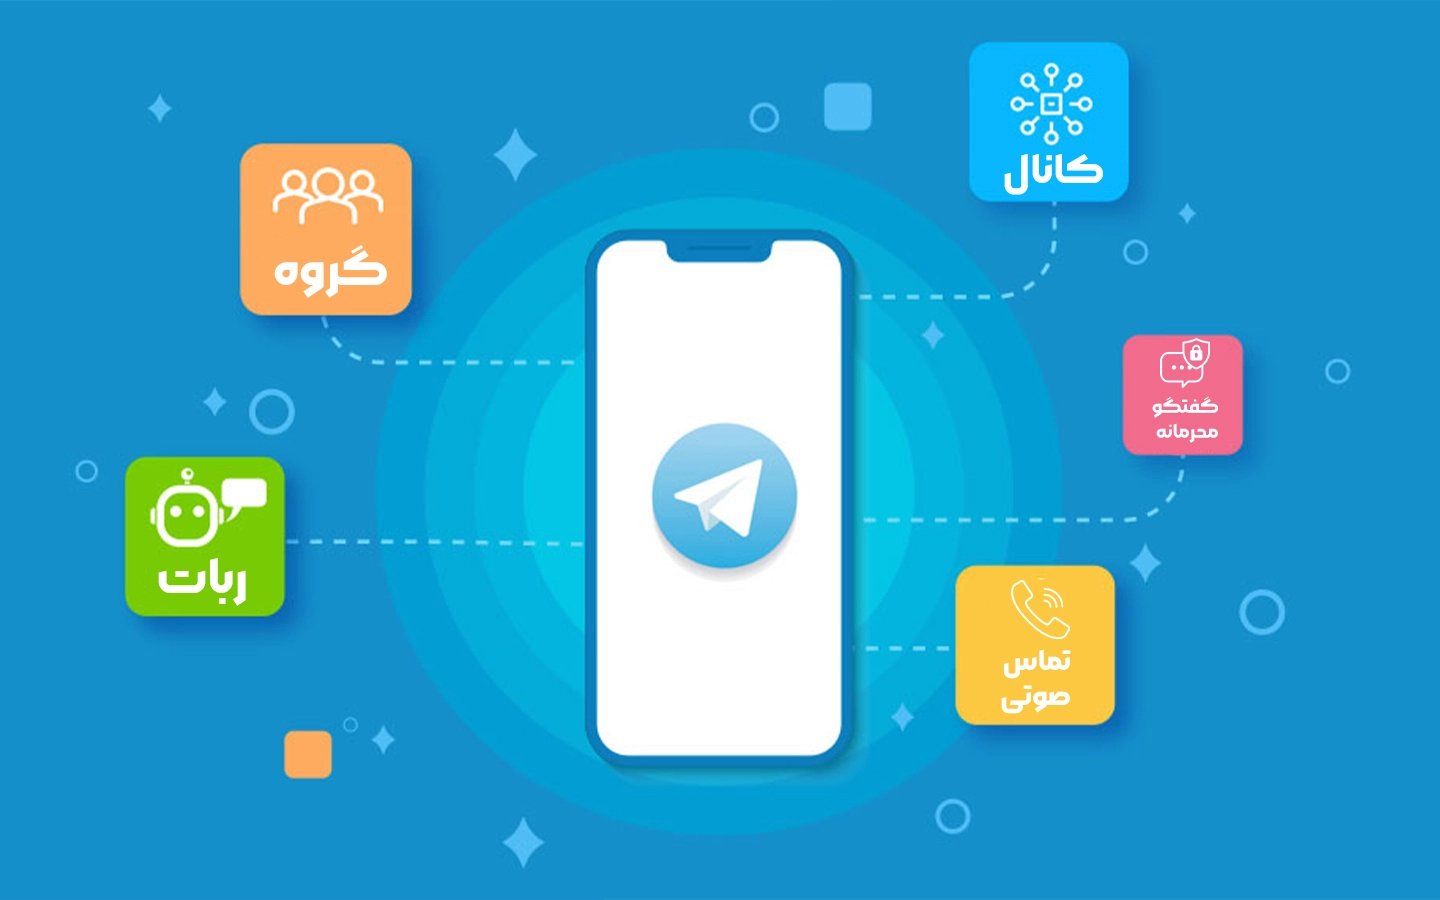 Since the restrictions on the use of the Telegram application in our country have made it a little difficult to use, you may be wondering why we should use this social network as a source of income at all? When we can get the same income from Instagram, why should we endure the troubles of this messenger? Presence of users in Telegram In response to this question, we must say that despite all these restrictions, Iranian users continue to use this social network and have an active presence in it by creating telegram channels and groups. When using the Internet as a source of revenue, we need to consider where users are most present. Whether we want to sell a product, advertise or work as a social media admin, Telegram channels are an attractive and lucrative option for monetization. Telegram up-to-date Another advantage that makes the Telegram social network a viable option for making money is its constant updates. We are all looking to work in a convenient and hassle-free workspace, which is why Telegram's messaging service is always updating its features. This advantage makes business users and audiences satisfied with Telegram and as a result have a more active presence in this social network. Various facilities and tools Regular Telegram updates upgrade its features and tools. If you are thinking of making money from Telegram channel, these features and tools will help you a lot. The possibility of designing and building a robot, building a group and launching a channel are among the attractive features that you can use to earn money from Telegram without any capital. Start making money from Telegram without the need for capital One of the major advantages of Telegram is that you do not need any capital to start a business; That is, it is enough to start an telegram channel or build a group or even build a robot, think about increasing the audience and generating revenue from it. No time and place restrictions One of the positive points about making money from Telegram is that it is borderless. There are no boundaries in this social network and you can apply your revenue generation method to all your users anywhere in the world. On the other hand, you do not need to be physically present and the costs of buying or renting a place, and you can continue your activities online without any special cost. Learn more about Telegram features